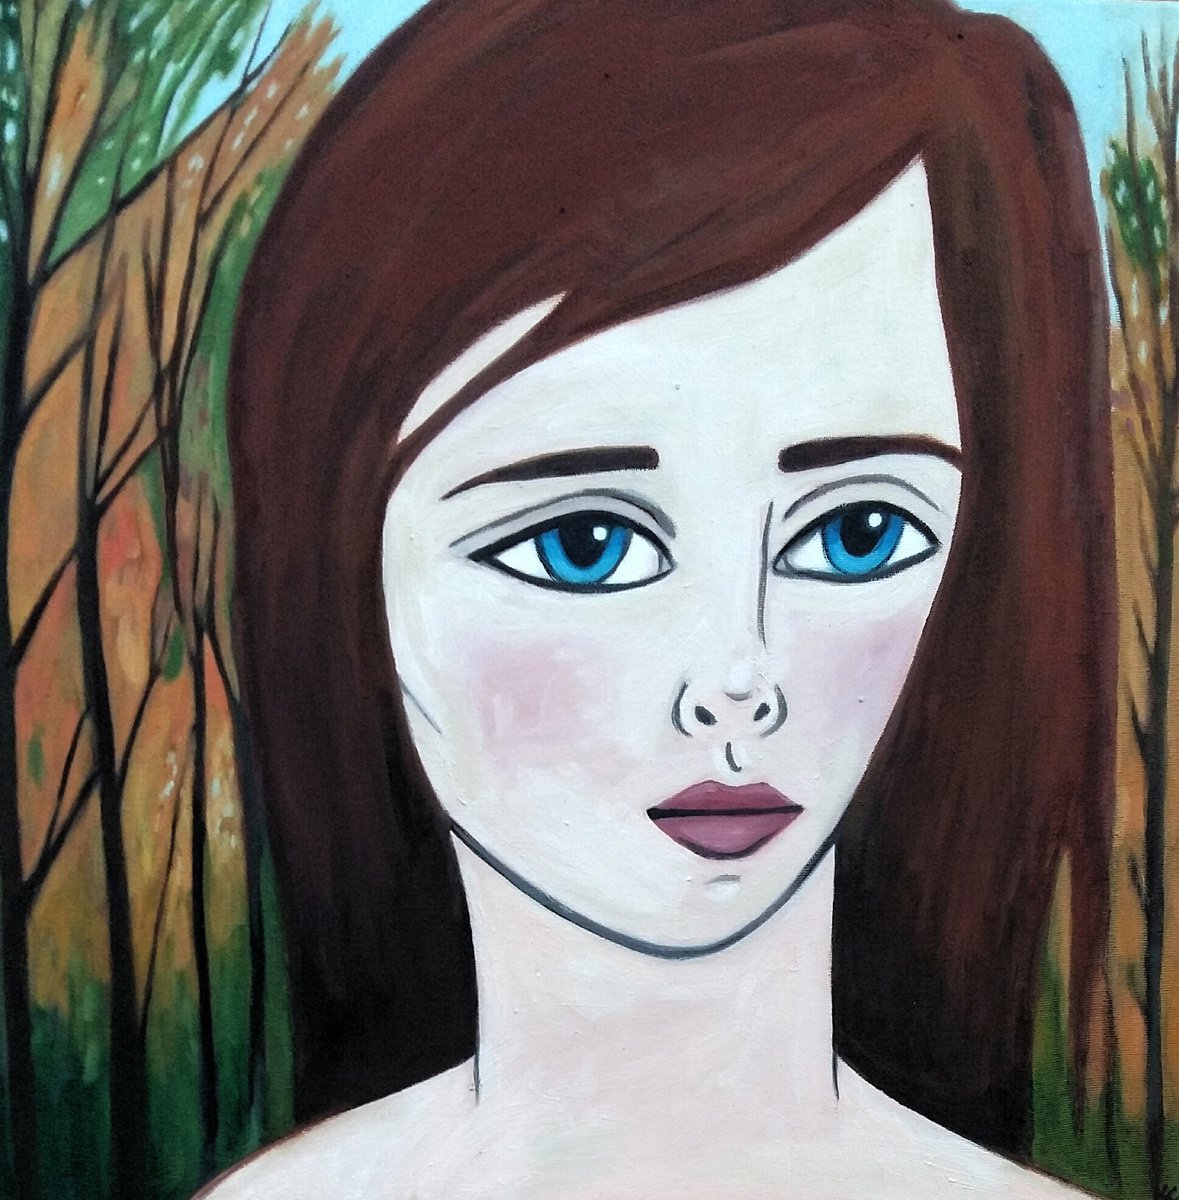 Forest Portrait - Original Oil Painting on Canvas by Kitty Cooper